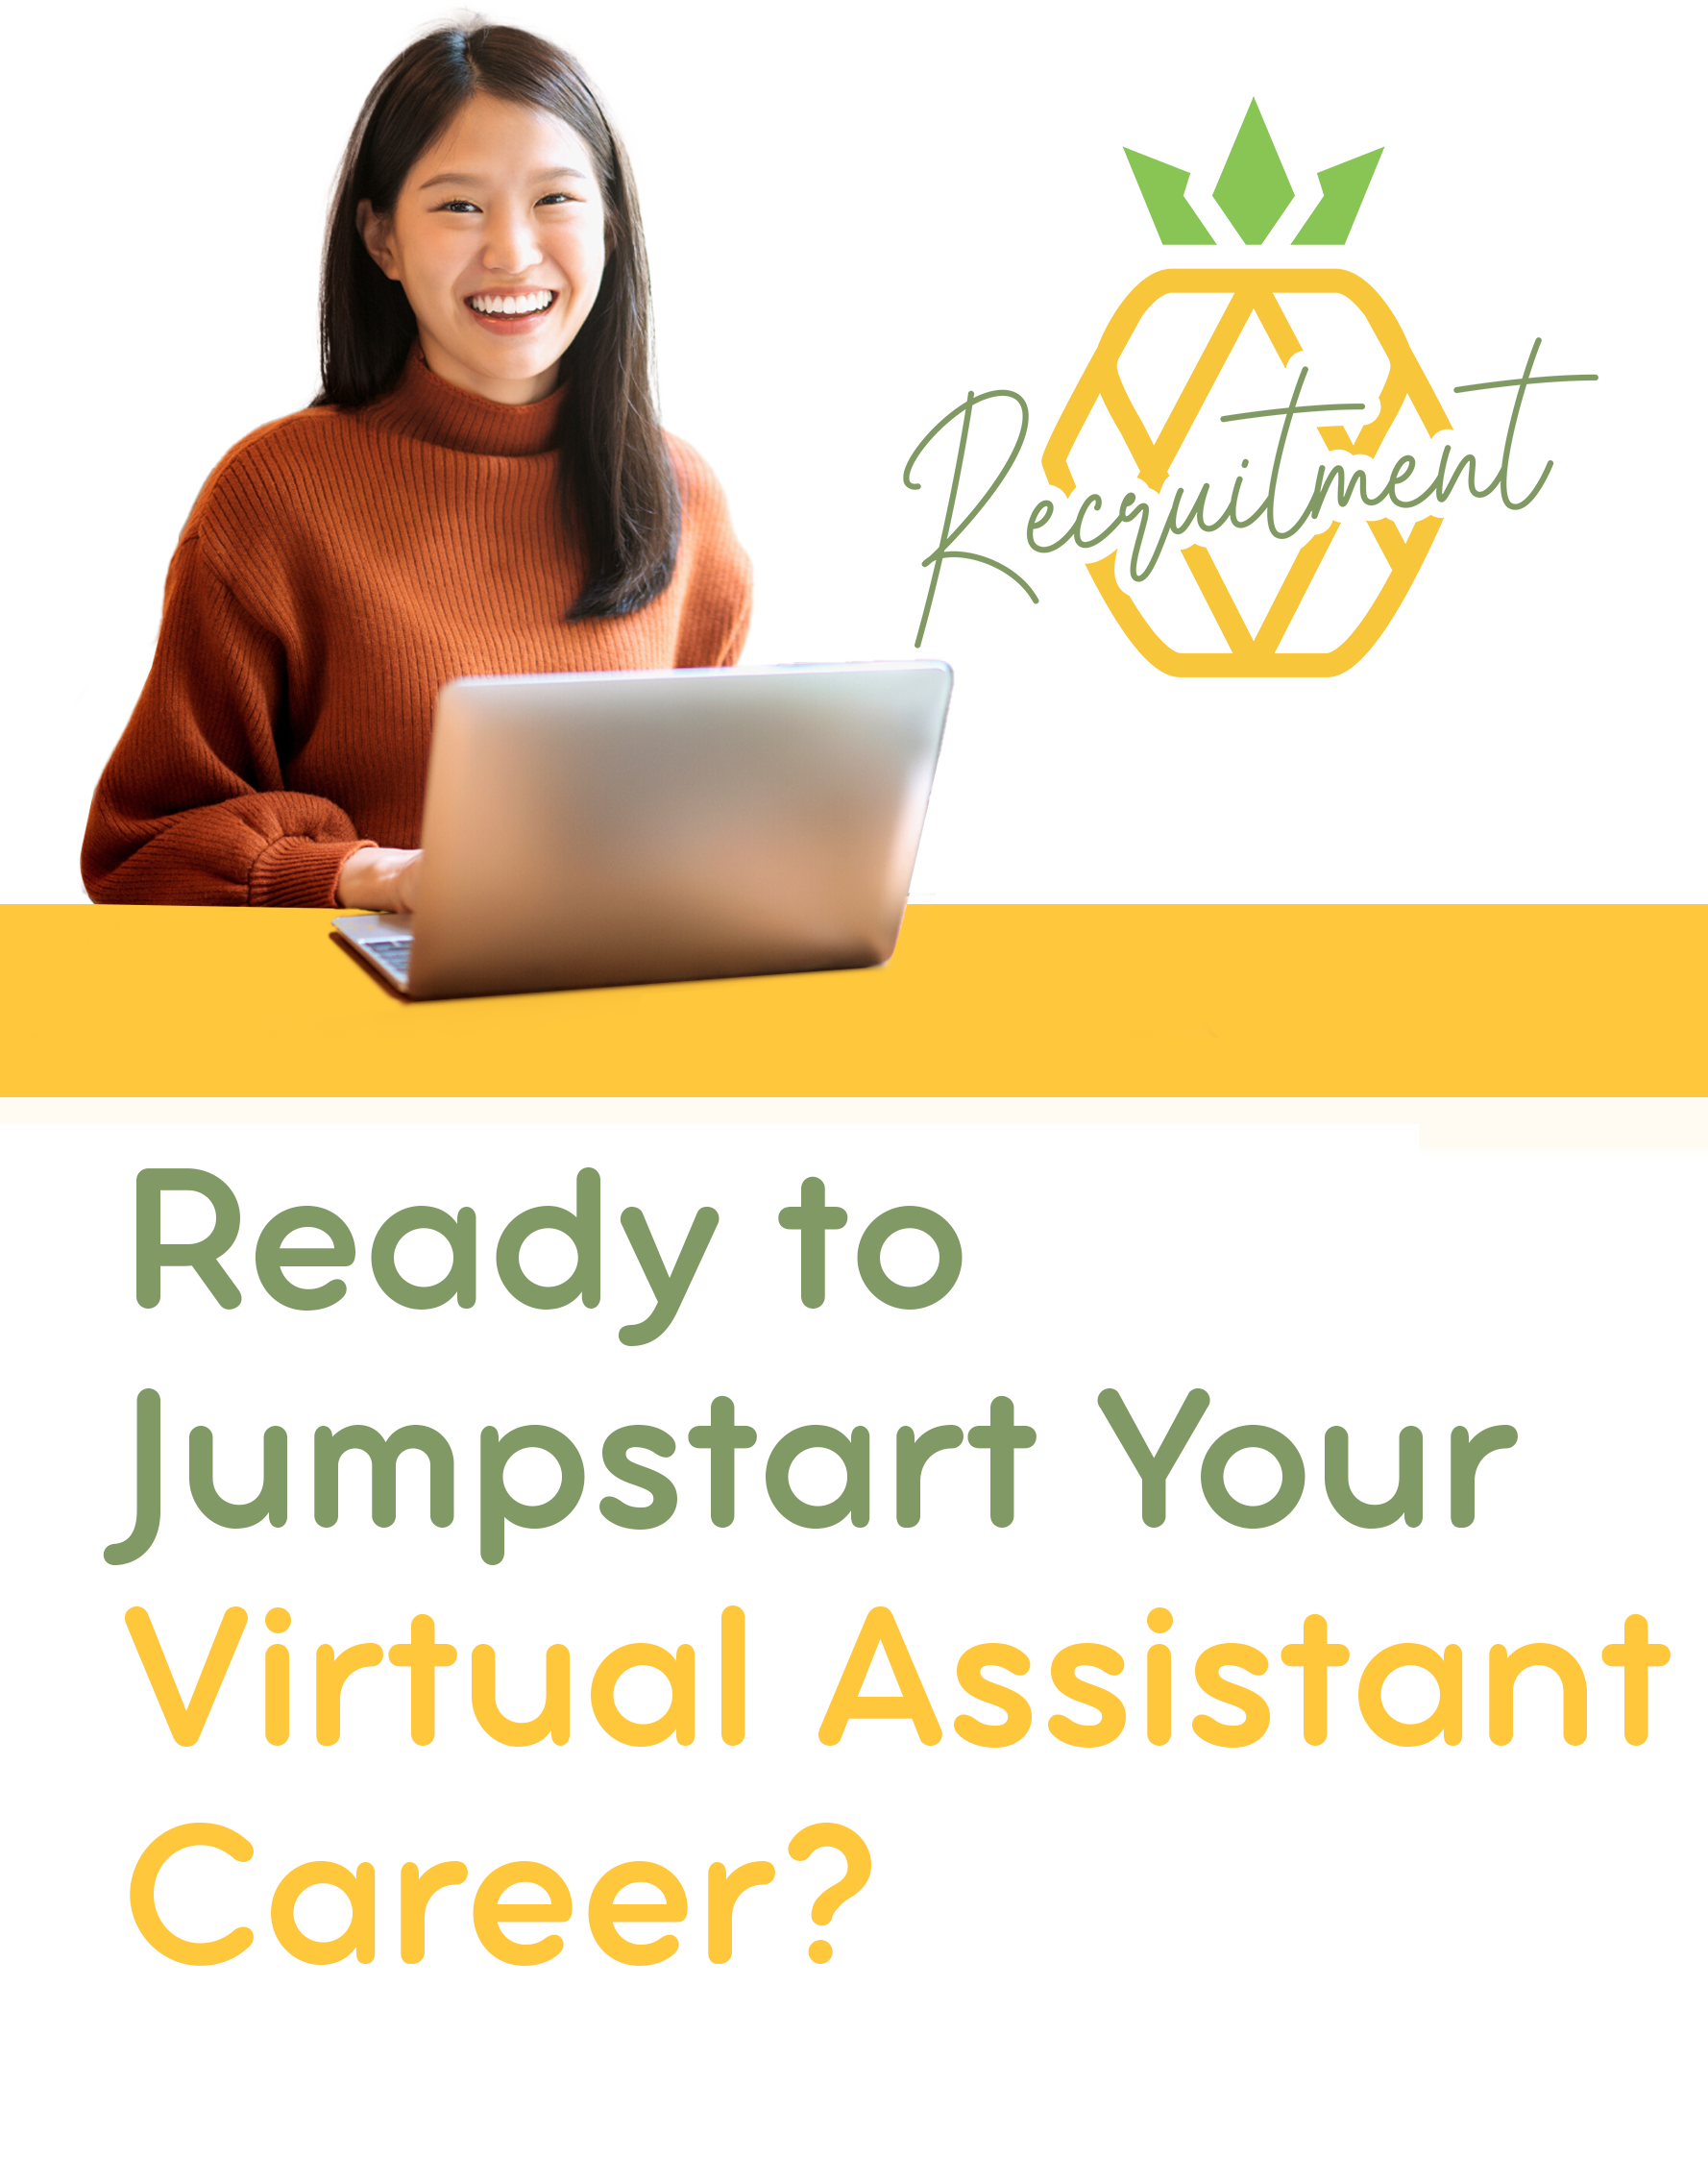 Ready to jumpstart your virtual assistant career